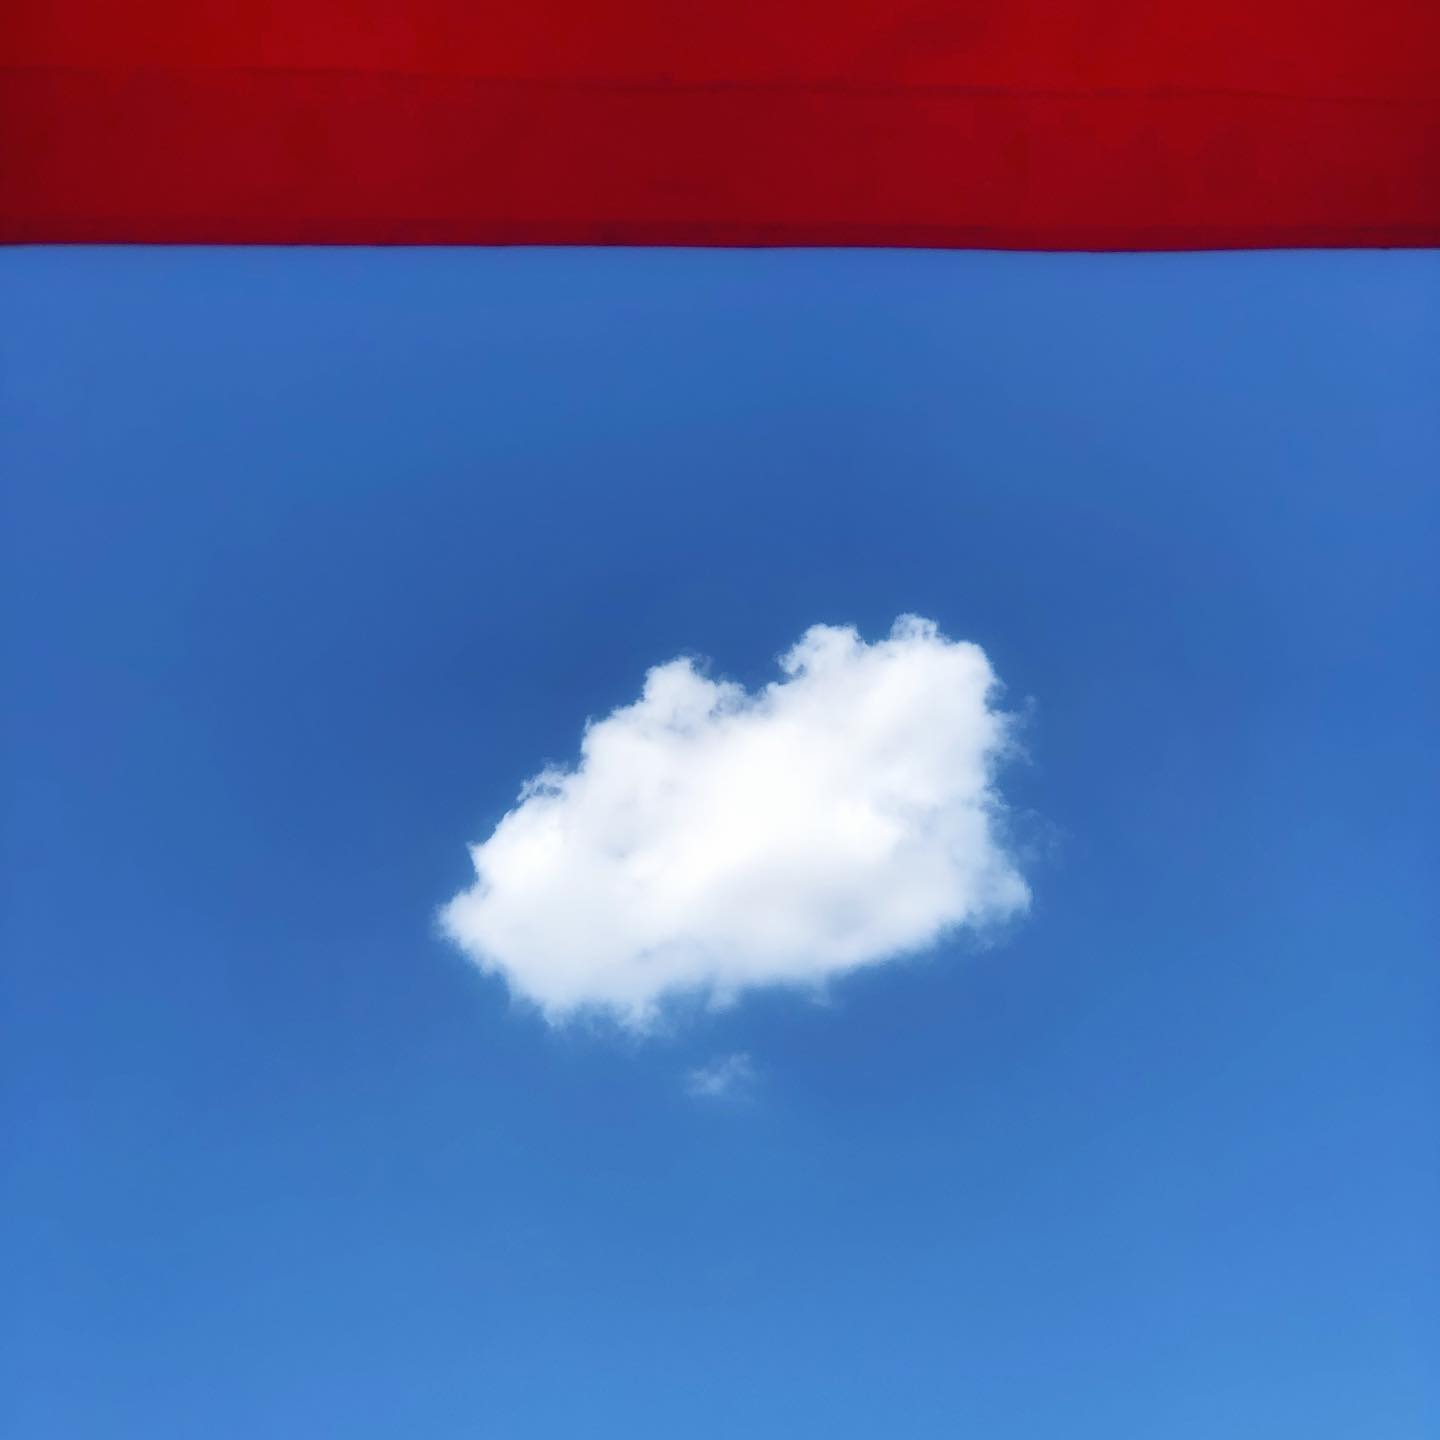 Red, blue and white
#minimal #clouds